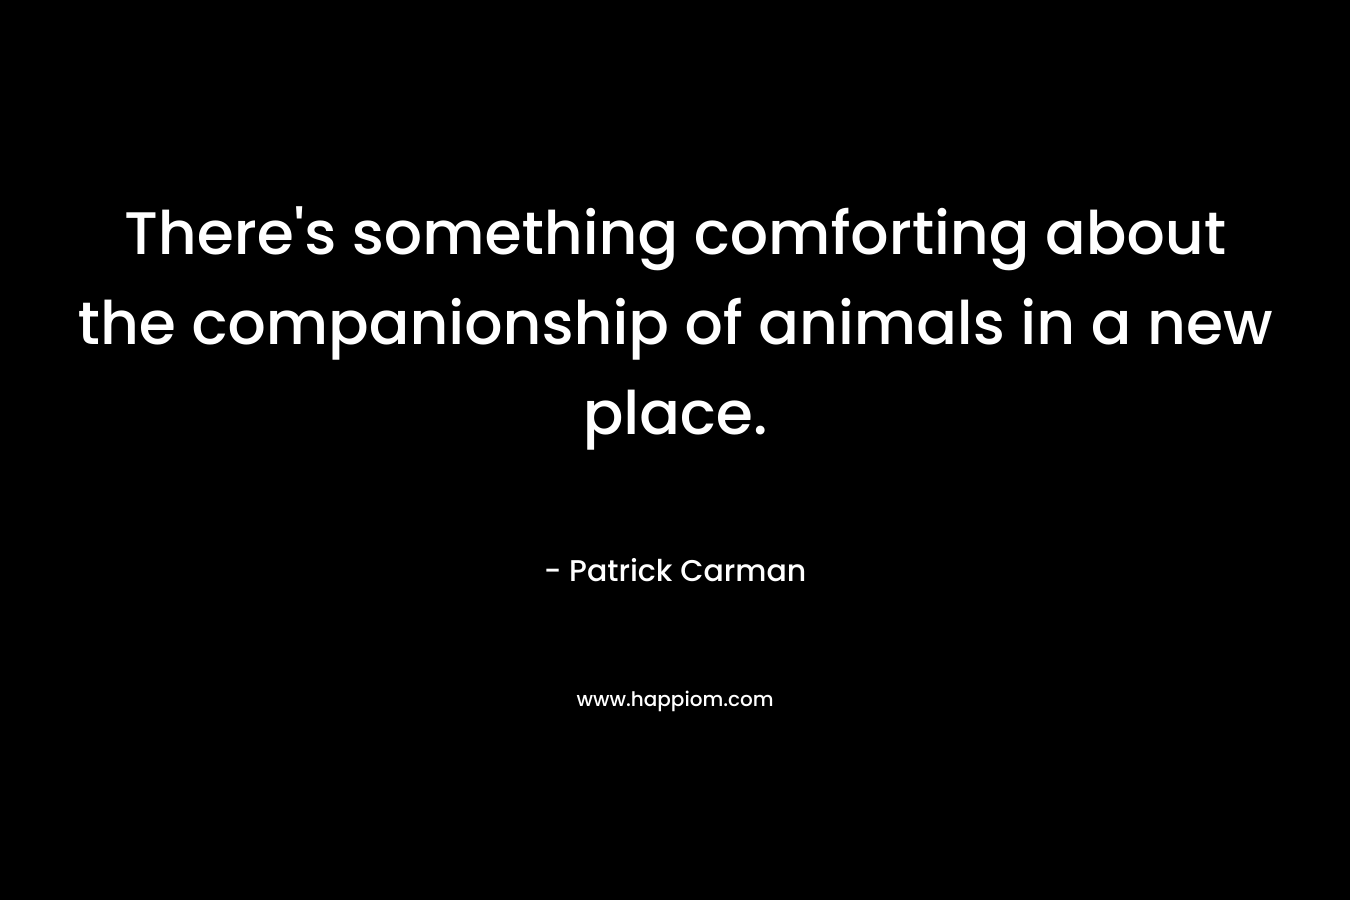 There’s something comforting about the companionship of animals in a new place. – Patrick Carman